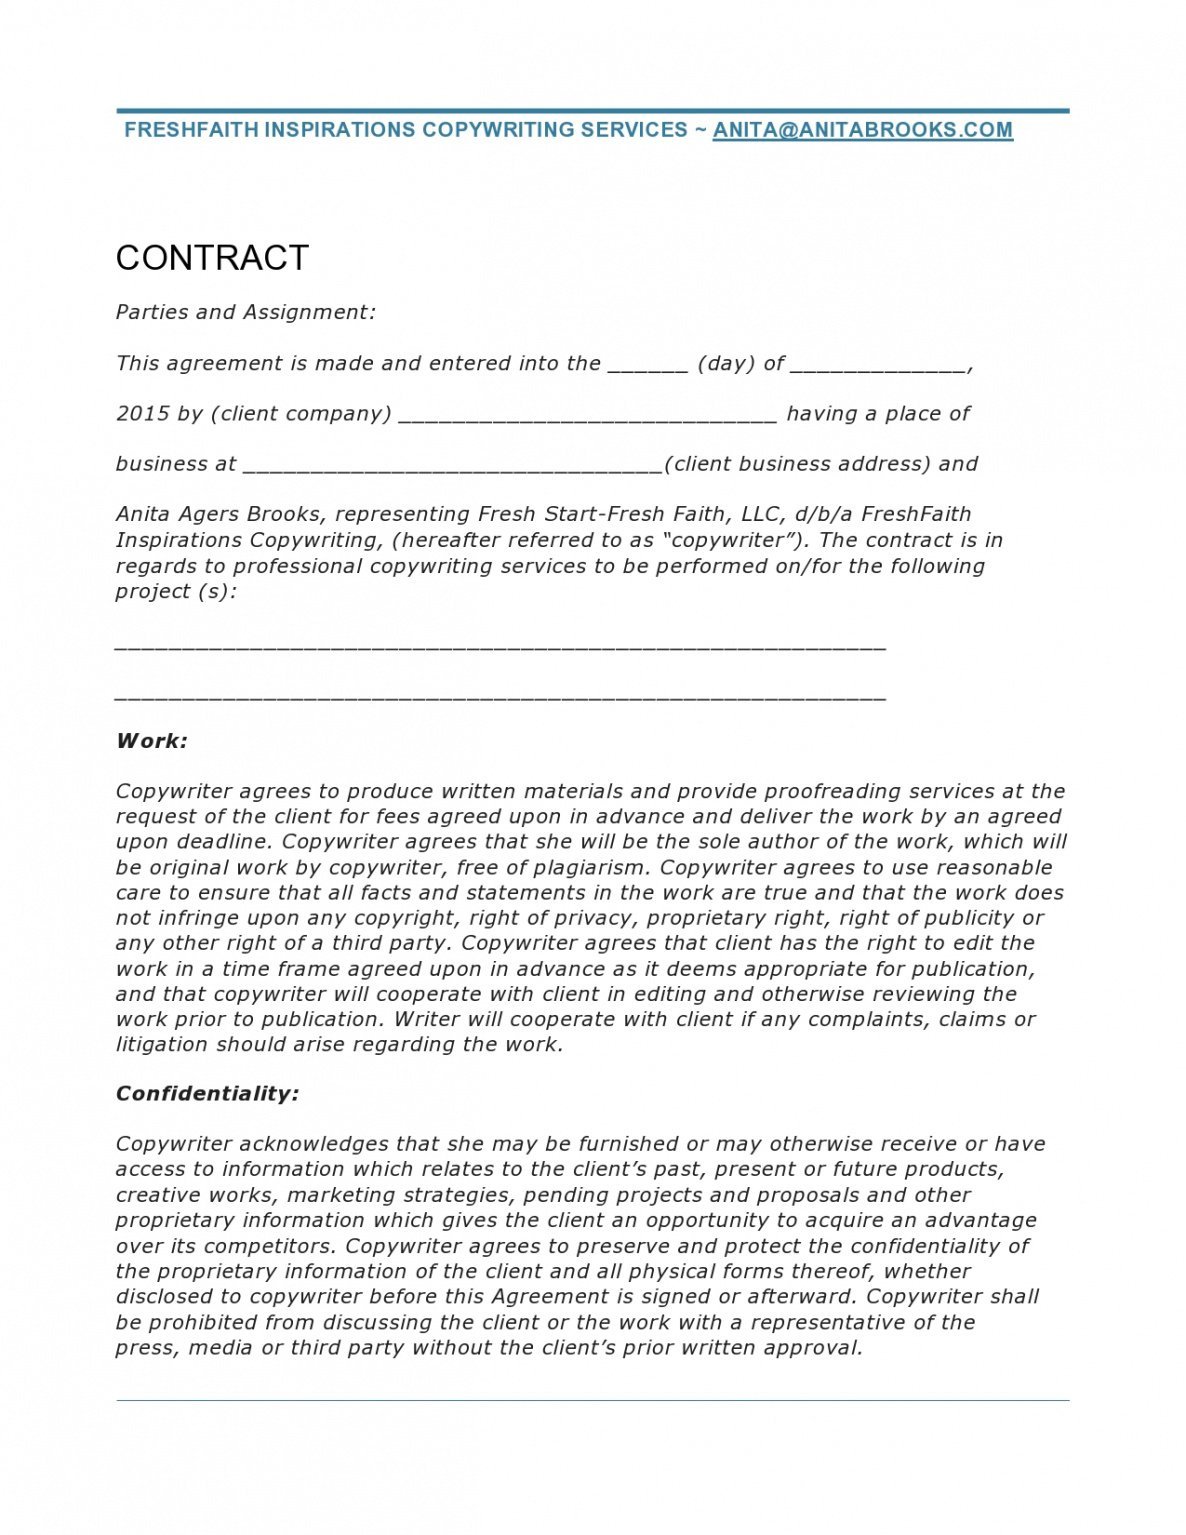 Costum Freelance Employment Contract Template Pdf Example | Steemfriends with Fascinating Taxi Driver Contract Agreement